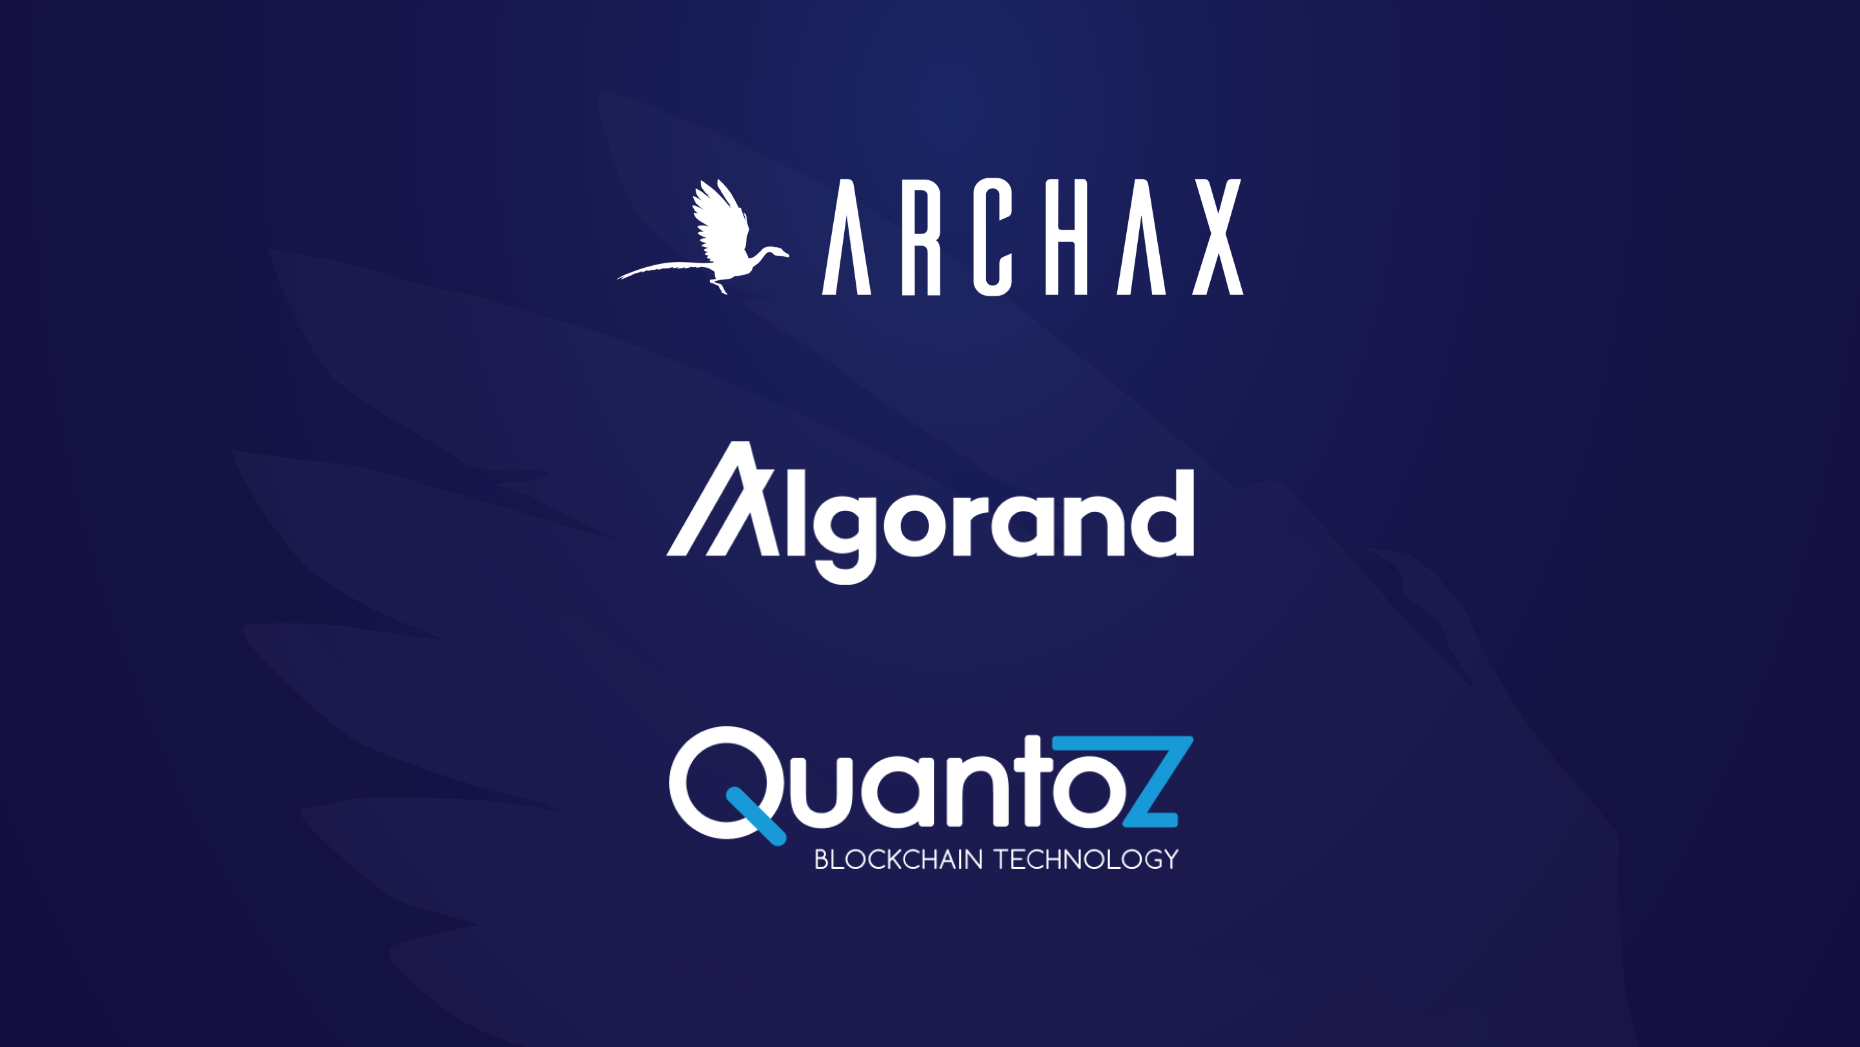 Archax makes abrdn money market fund accessible and transferable on Algorand blockchain using Quantoz EURD electronic money token